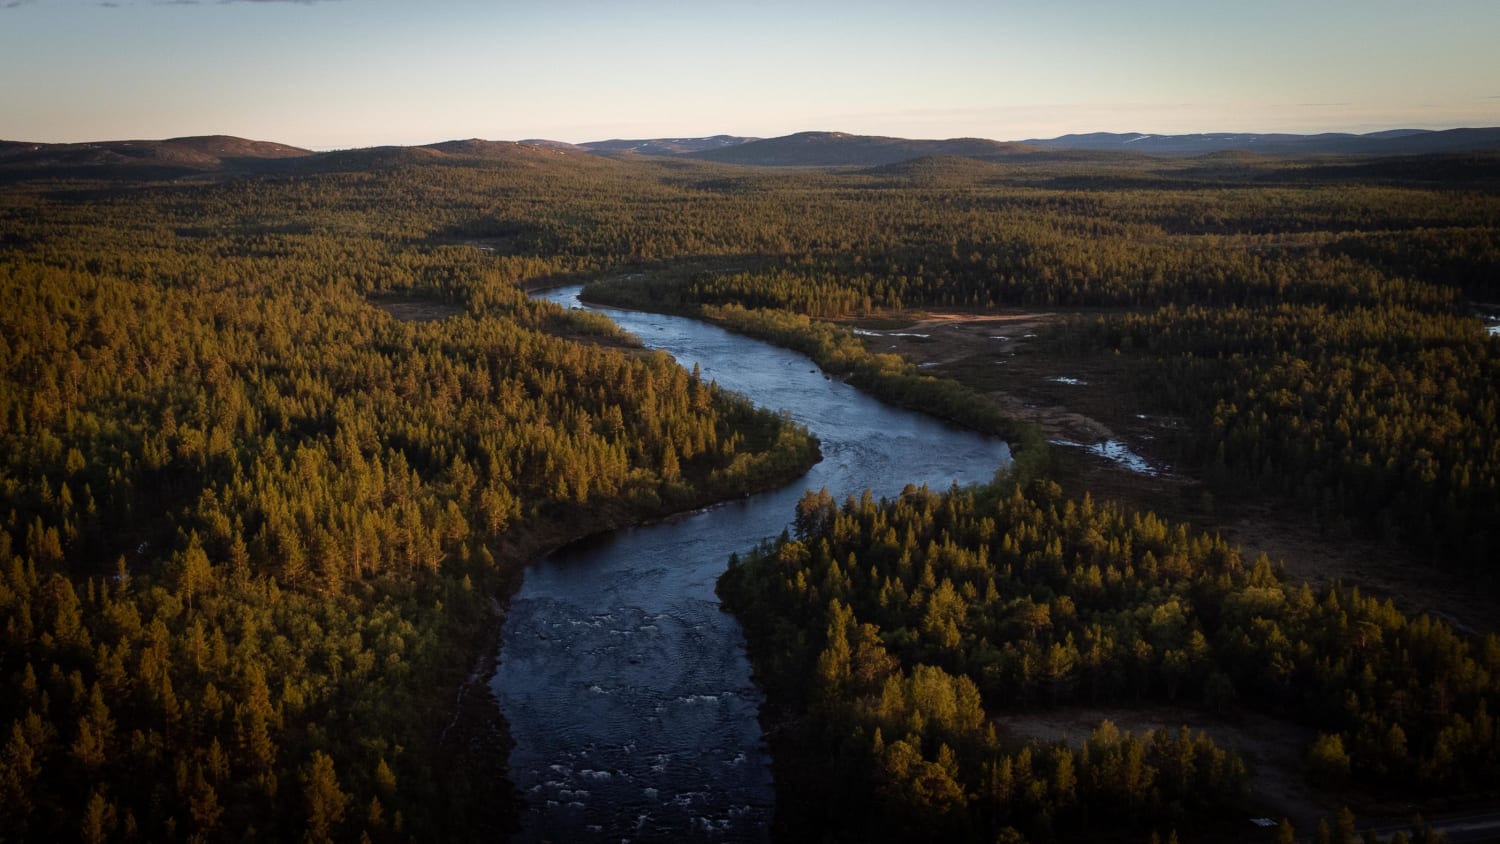 A river called 'Kielajoki' flowing through Muotkatunturi Wilderness Area in Lapland, Finland at 00:30am. This is as dark as it gets until 25th of July, when sun will be setting the next time.